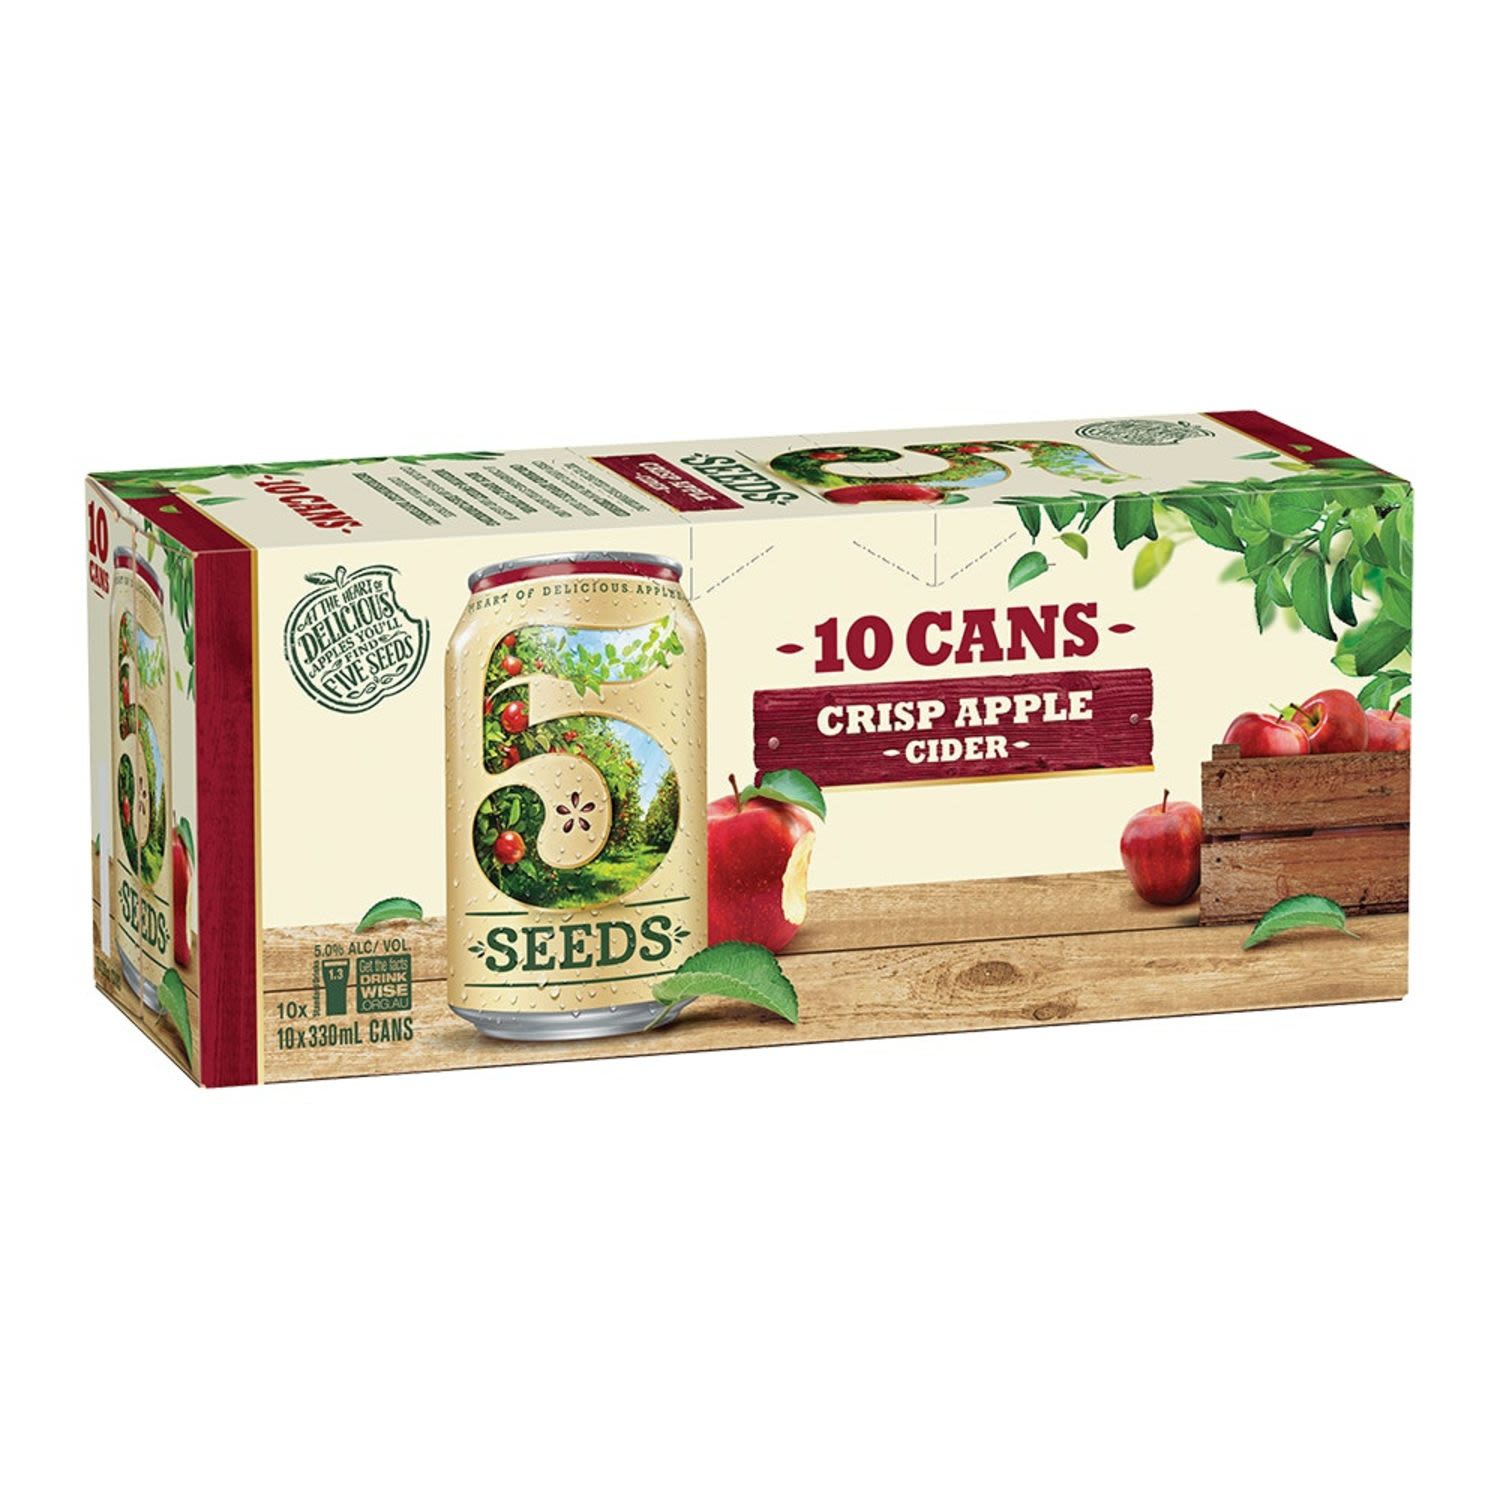 Crafted as a sparkling cider from crushed orchard apples to deliver a champagne-style aroma with rich apple flavour. For those who prefer a less sweet cider, but not too dry.<br /> <br />Alcohol Volume: 5.00%<br /><br />Pack Format: 10 Pack<br /><br />Standard Drinks: 1.4</br /><br />Pack Type: Can<br /><br />Country of Origin: Australia<br />